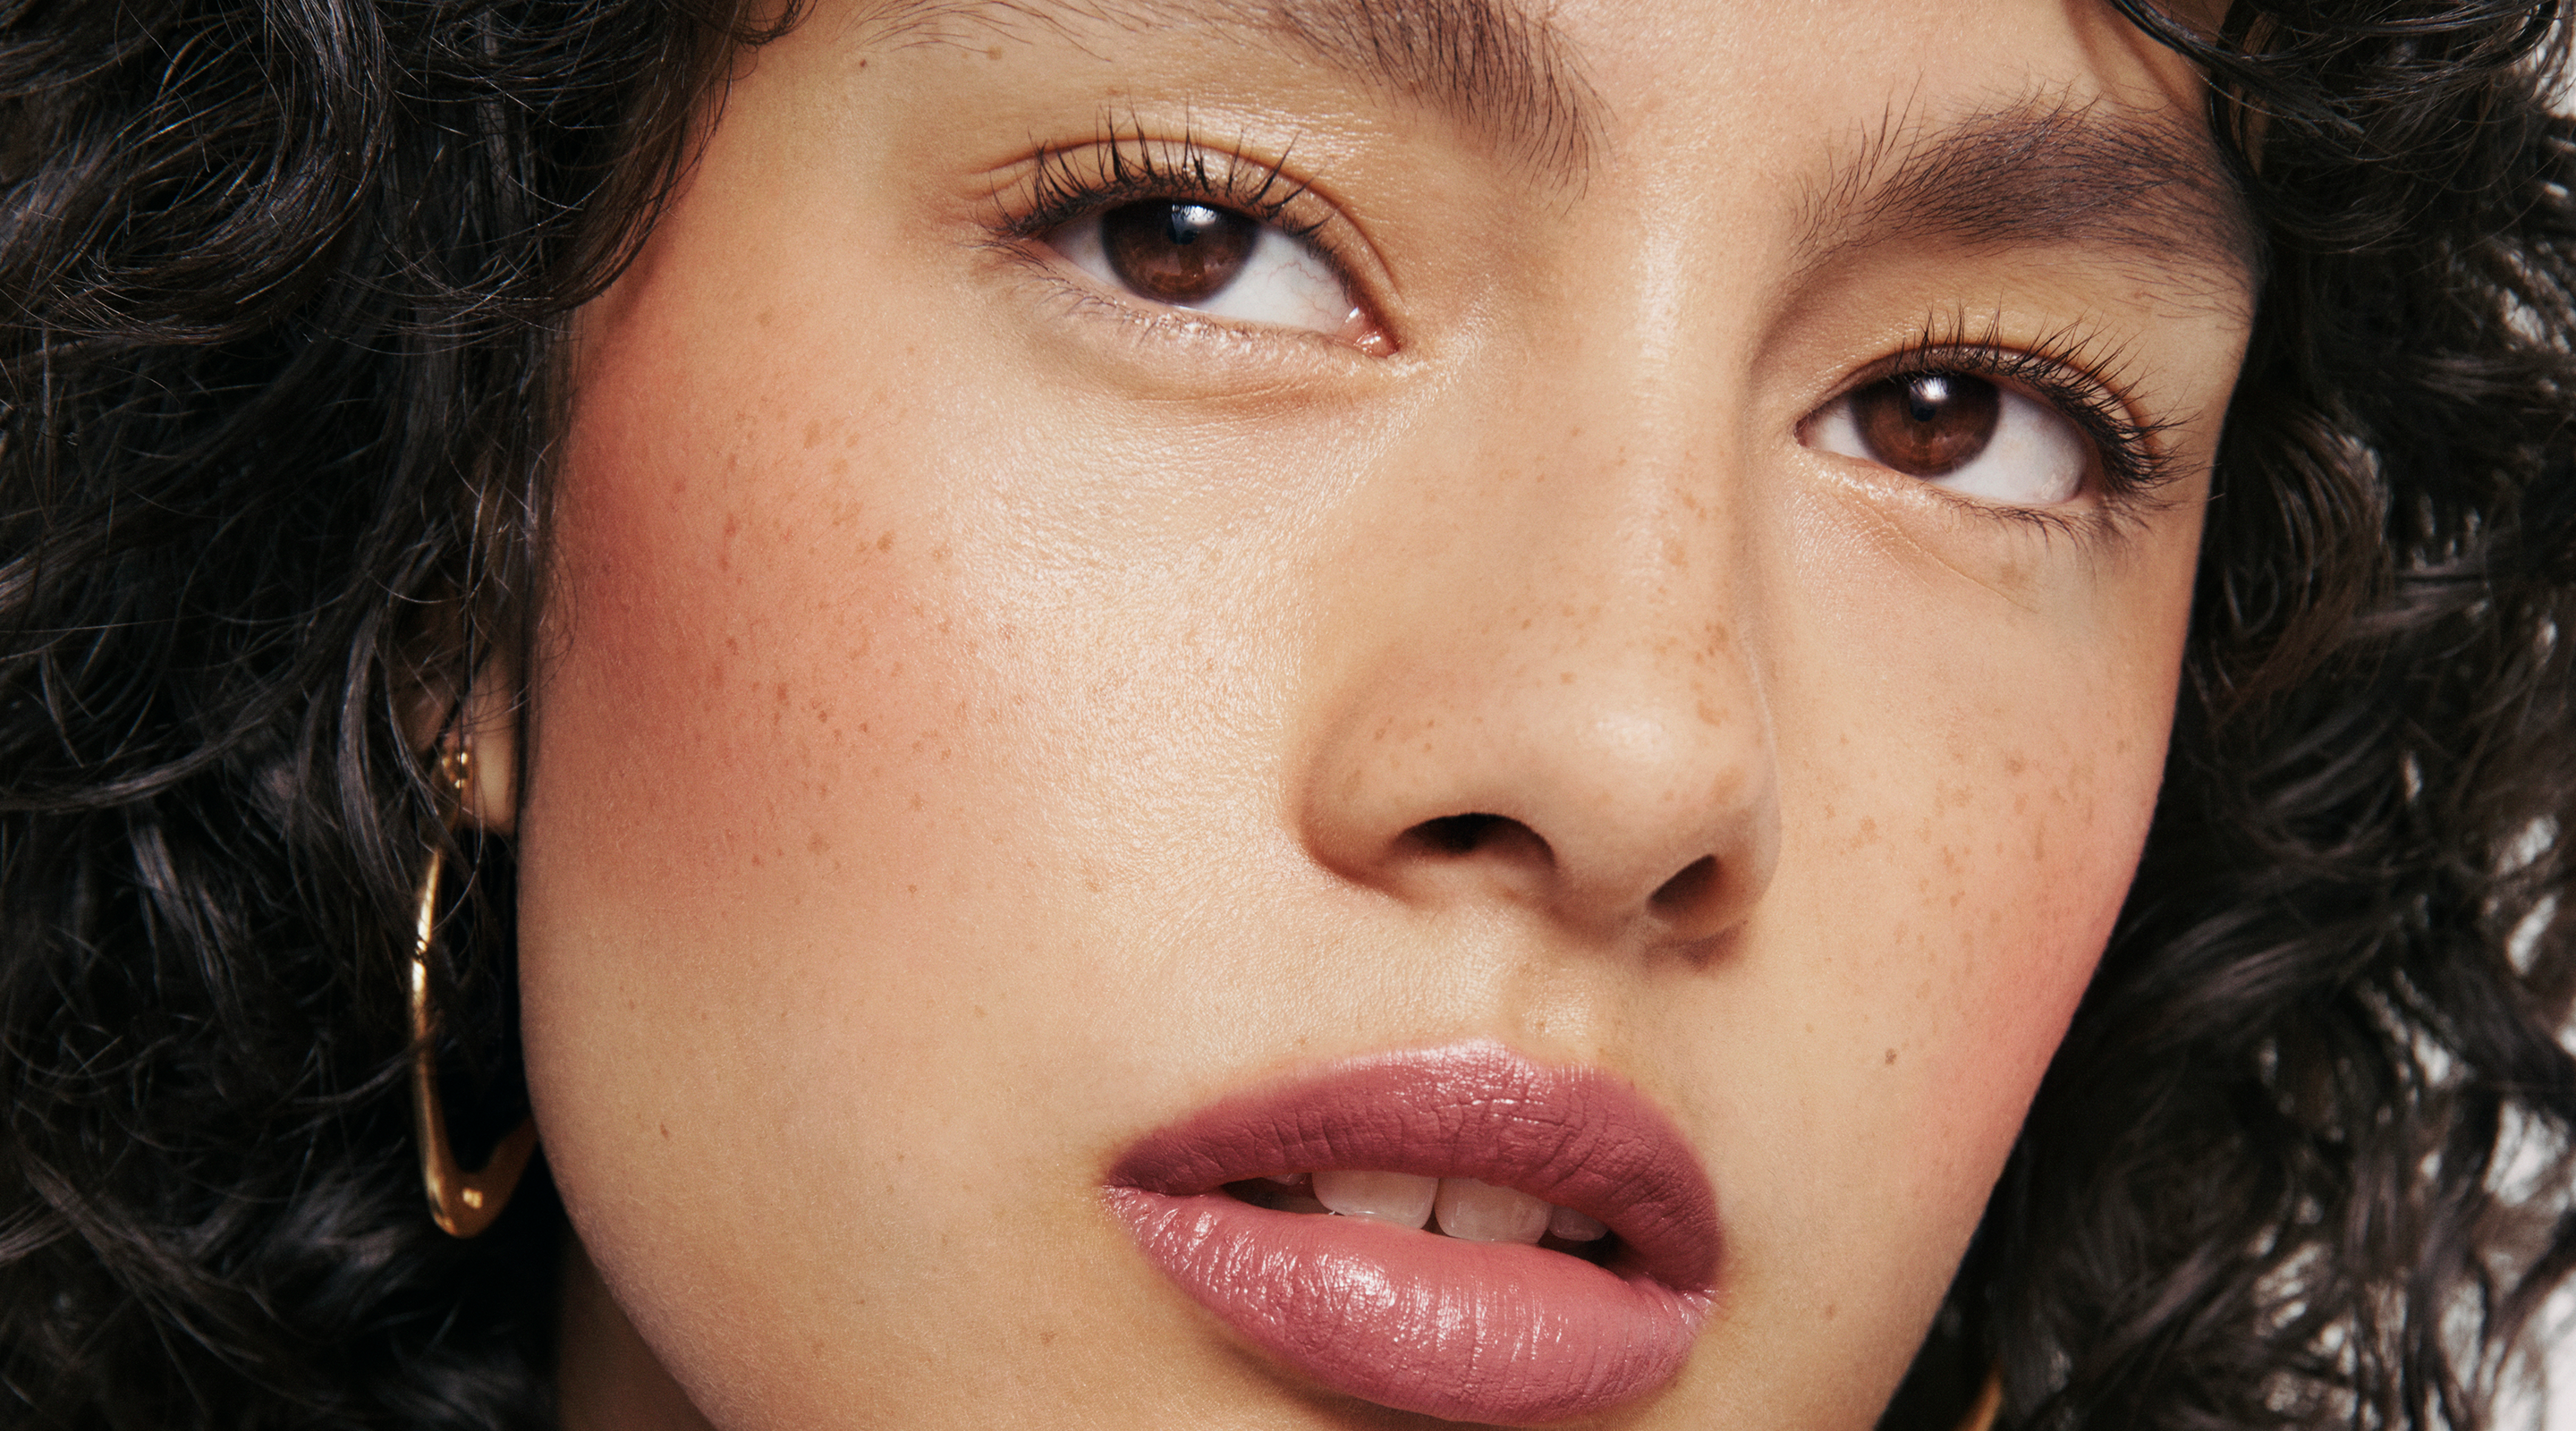 Where Does Blush Go? Here's What Makeup Artists Say About Blush